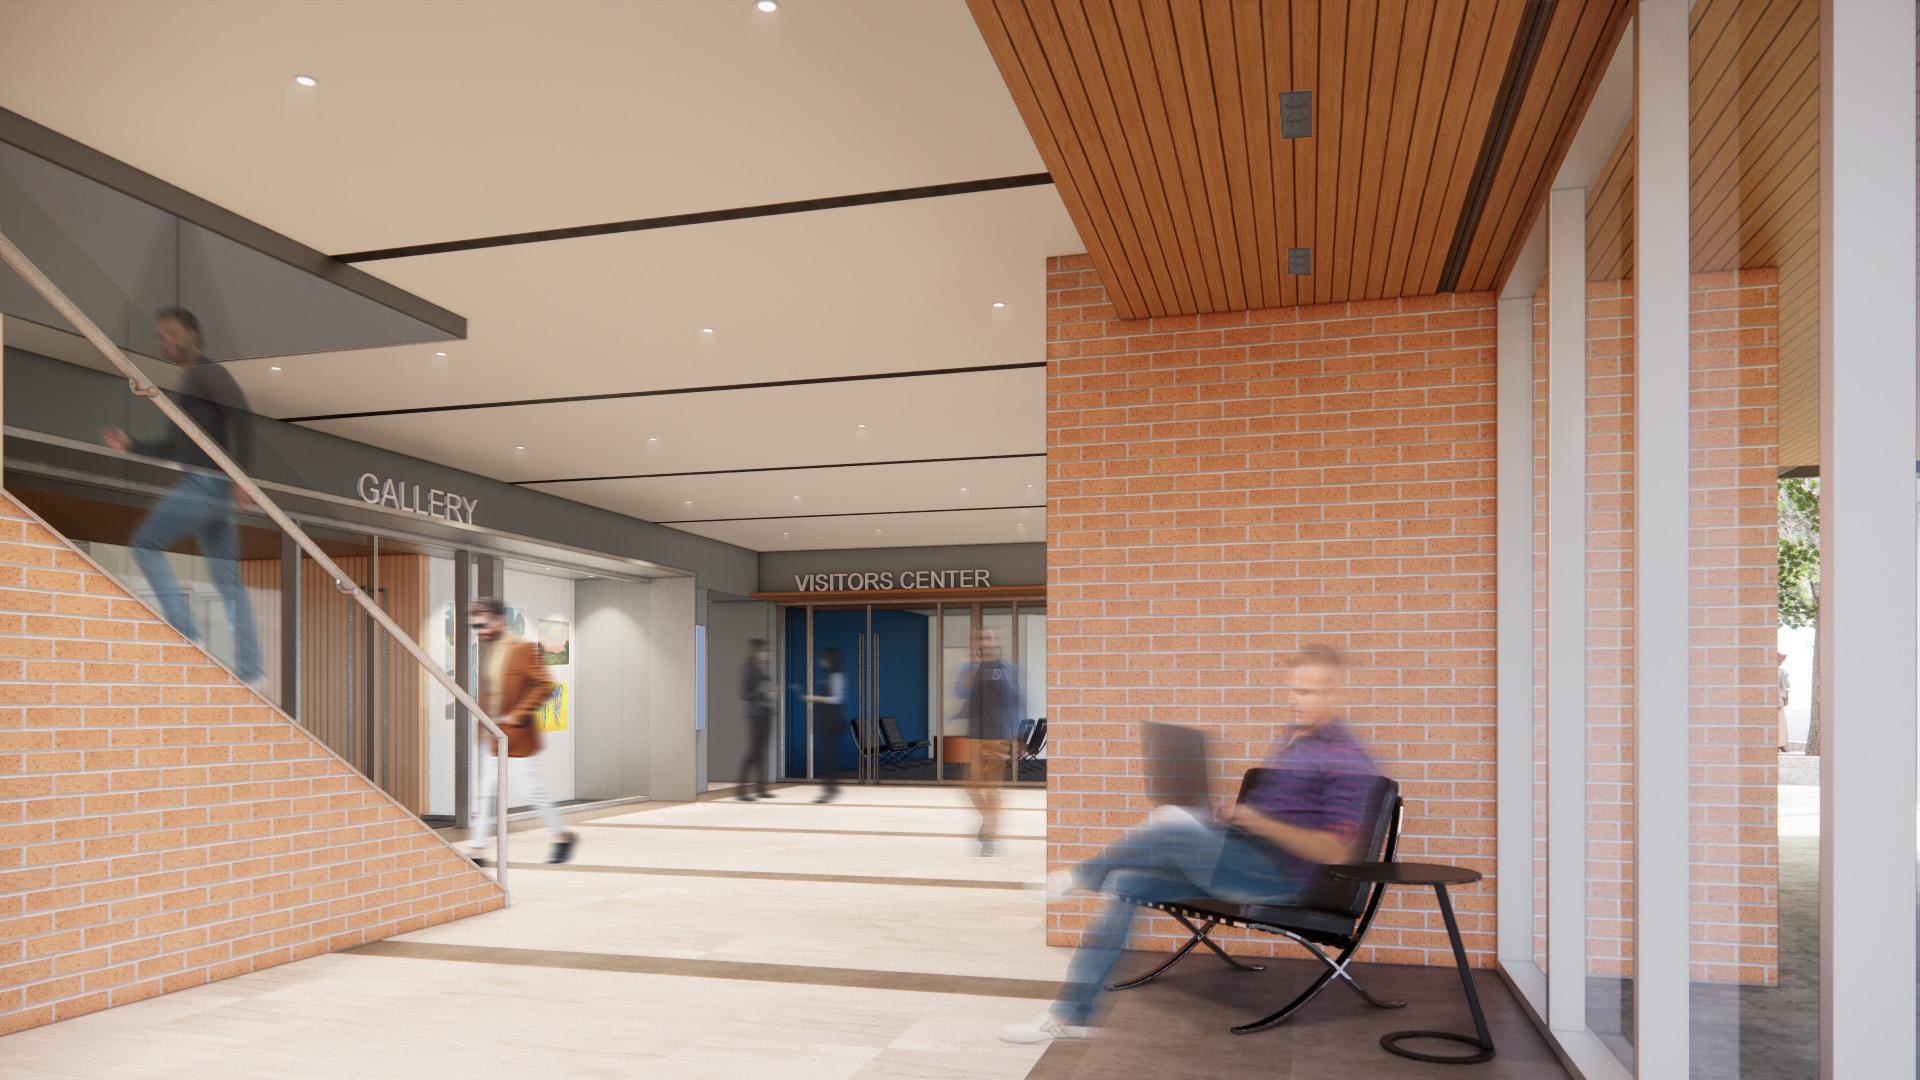 Rendering of the lobby of a visitor's center and public gallery.